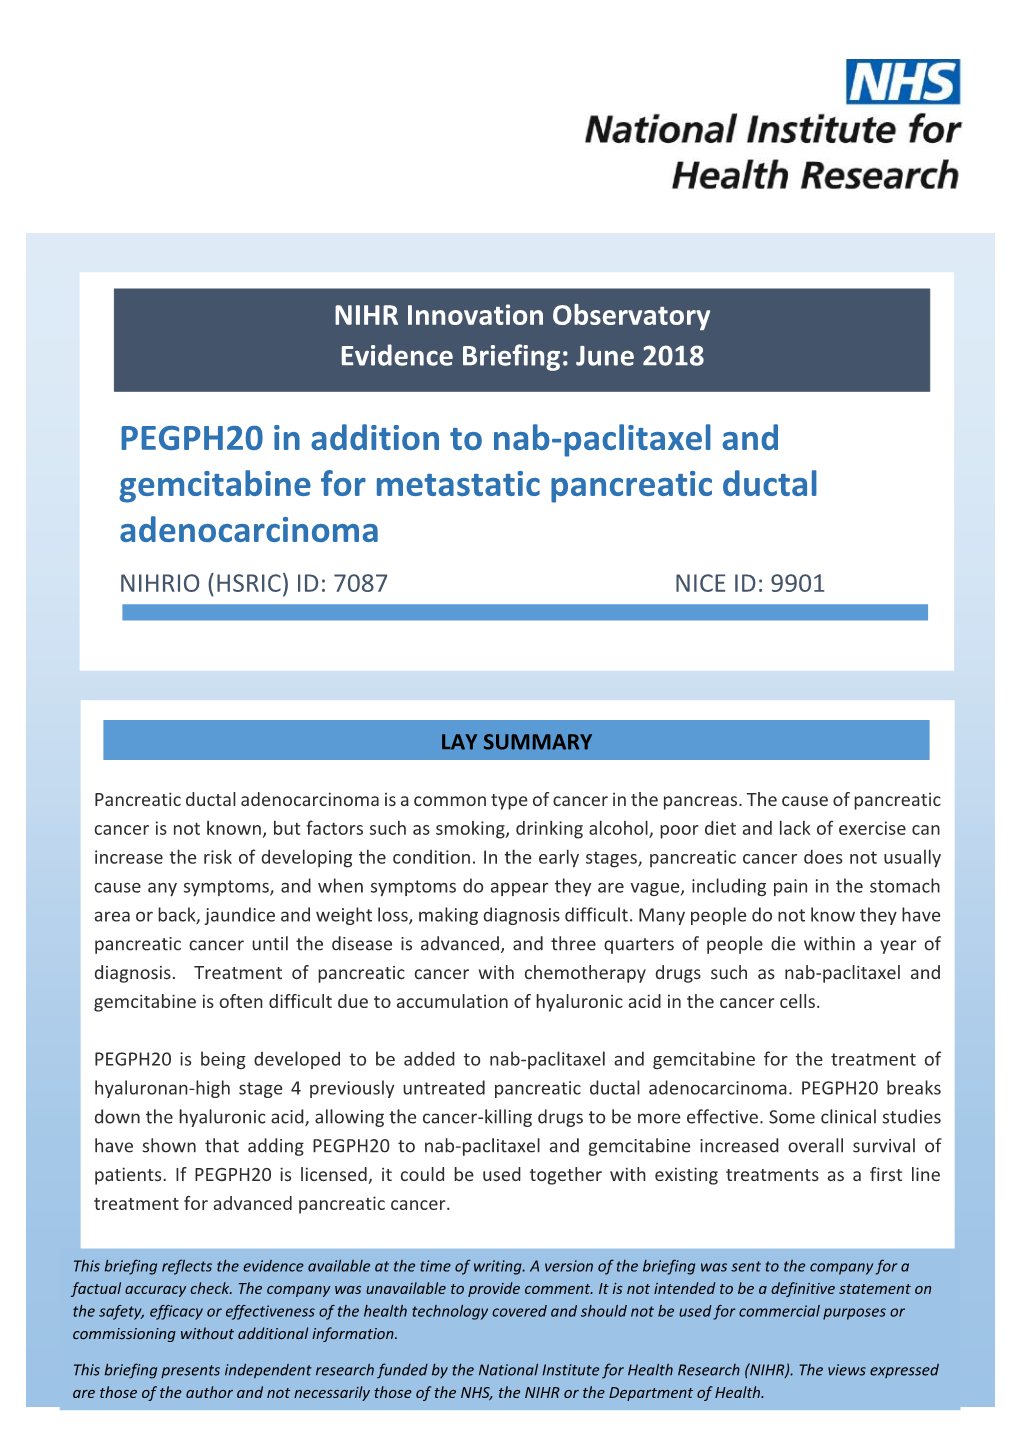 PEGPH20 in Addition to Nab-Paclitaxel and Gemcitabine for Metastatic Pancreatic Ductal Adenocarcinoma NIHRIO (HSRIC) ID: 7087 NICE ID: 9901